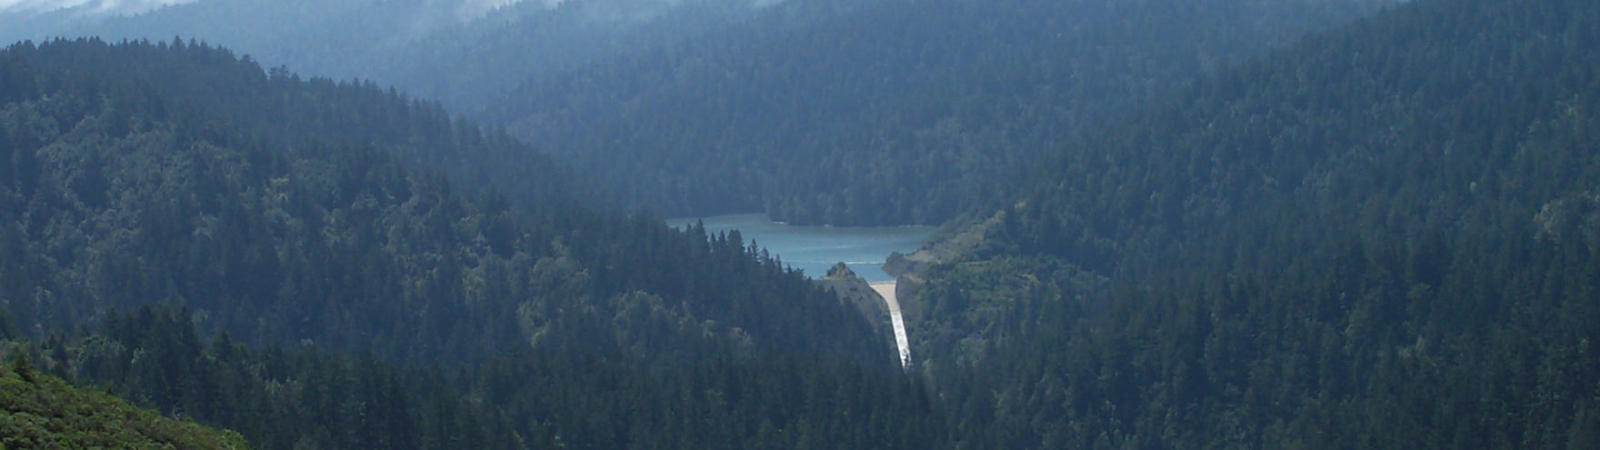 A spillway from a dam surrounded by tree-covered mountains. 